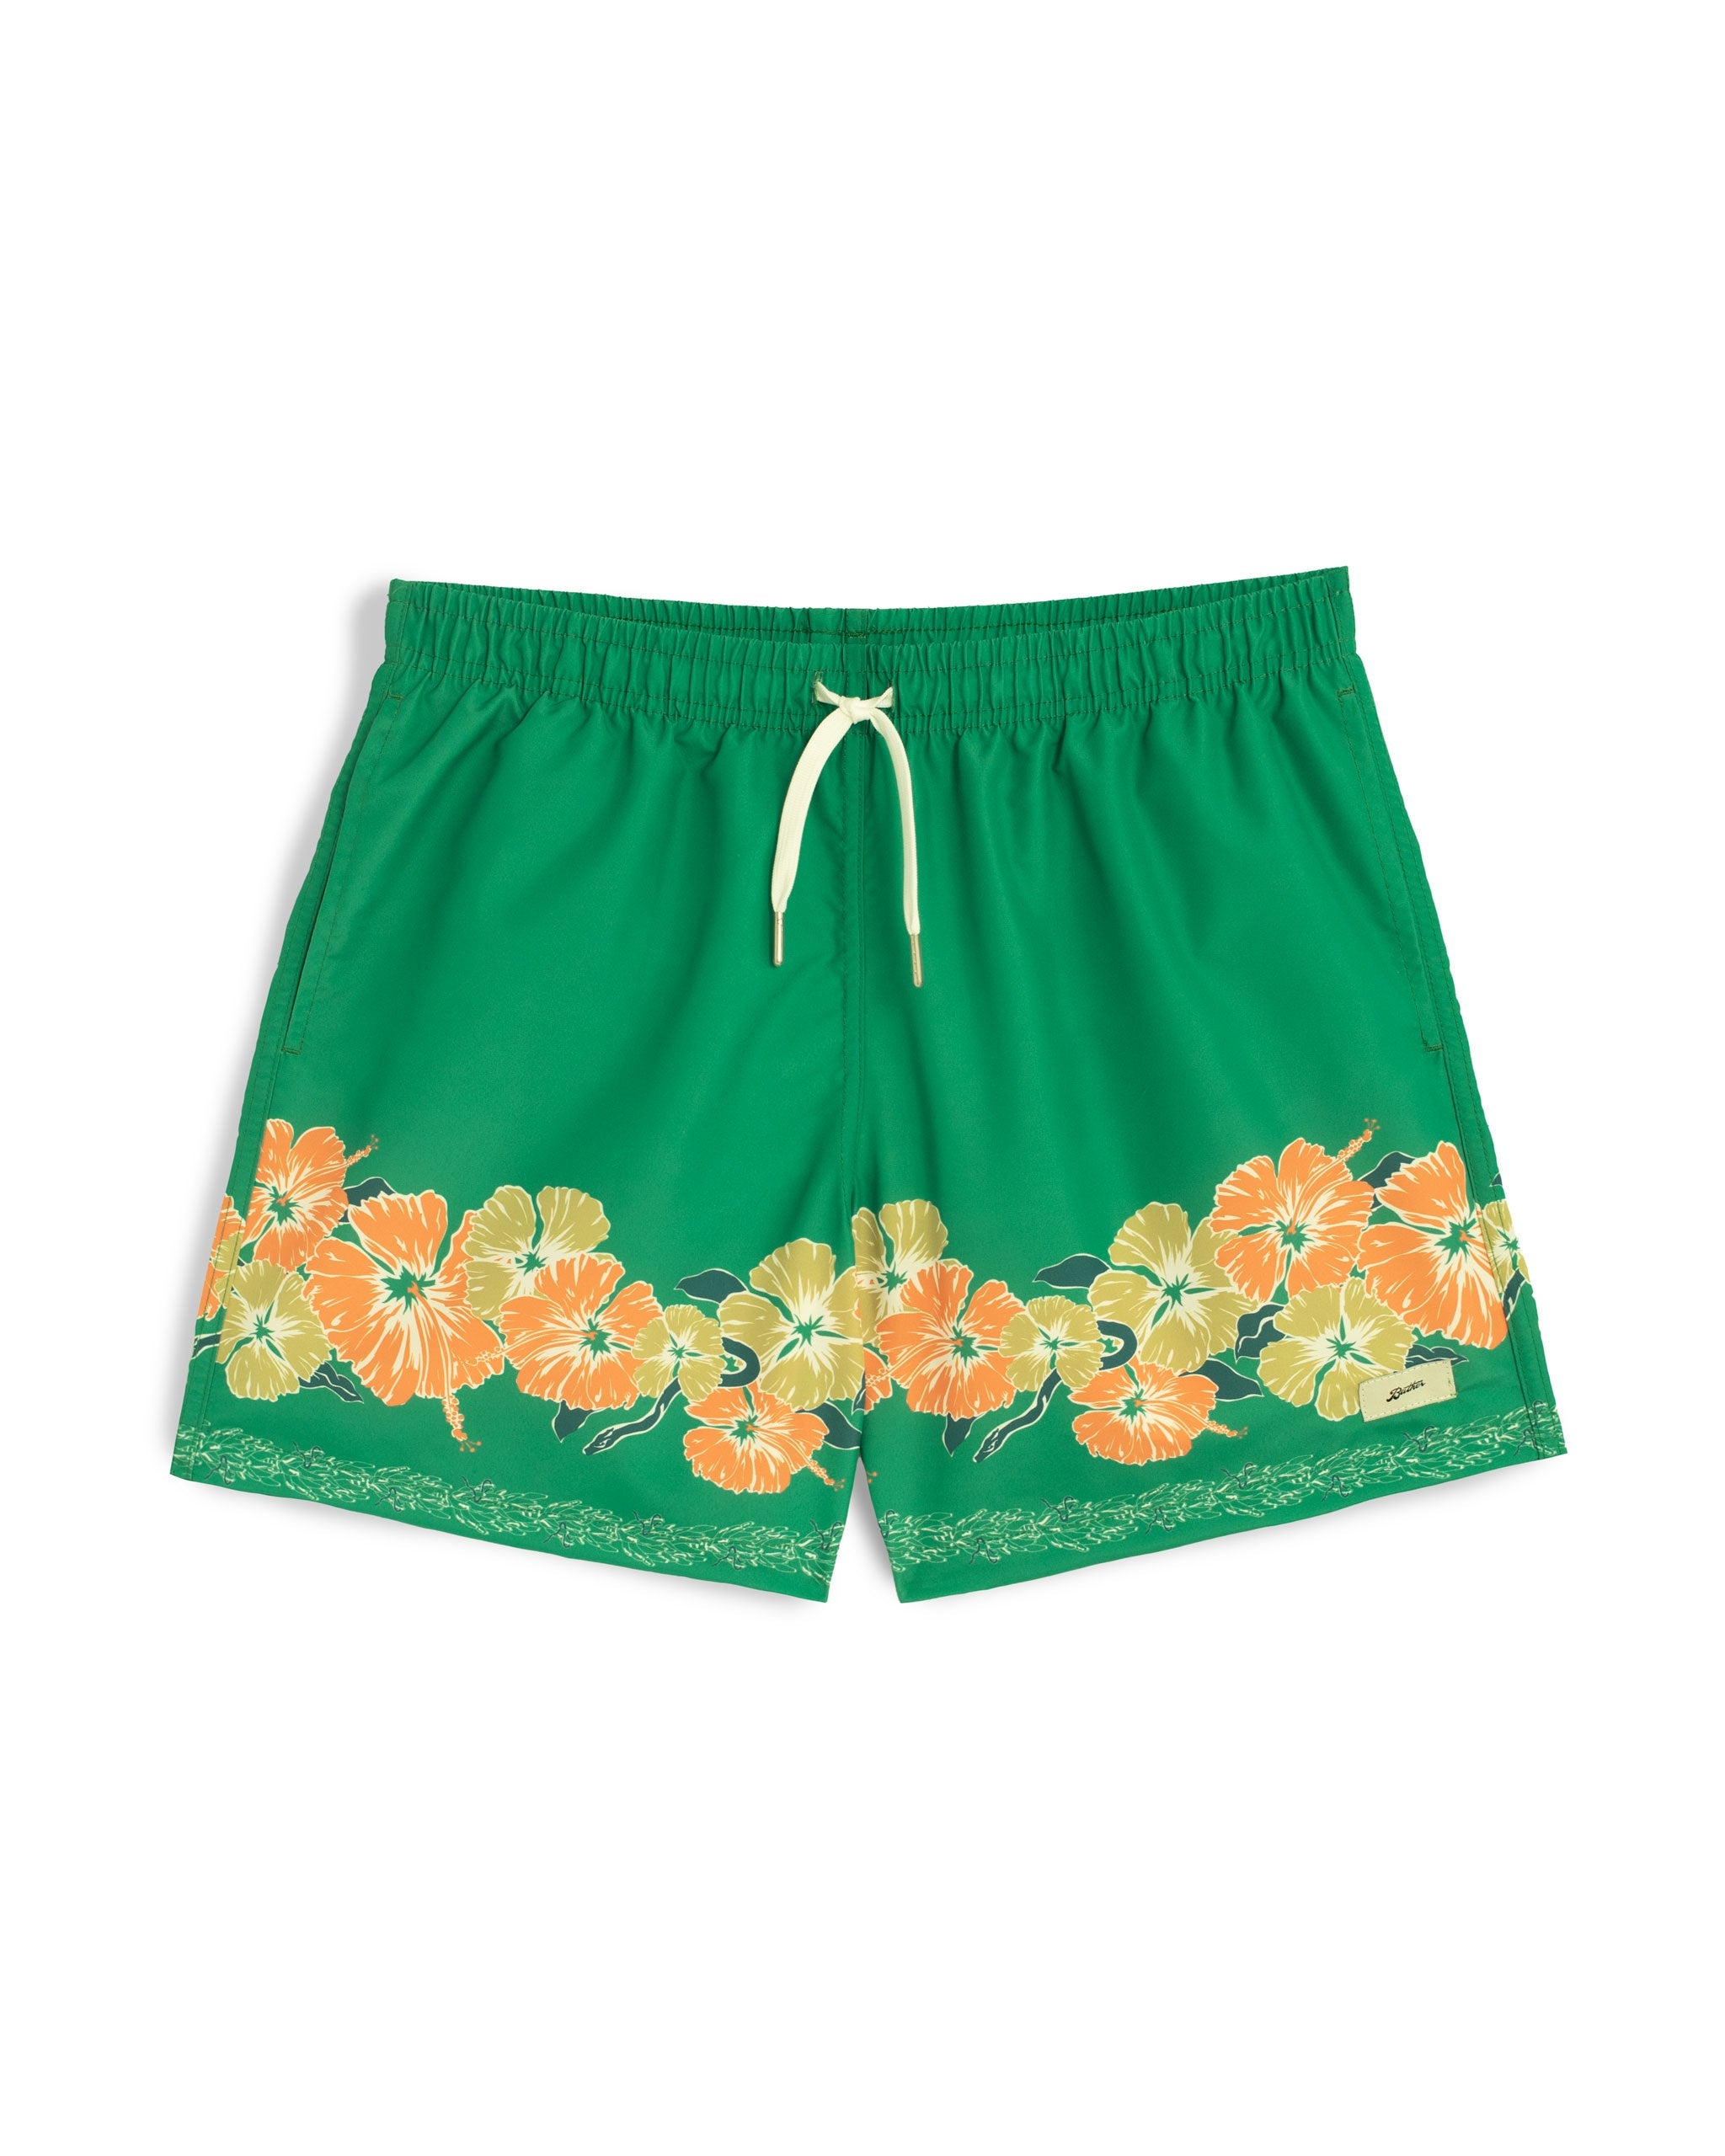 Green swim trunk with floral motif pattern on the bottom of the leg